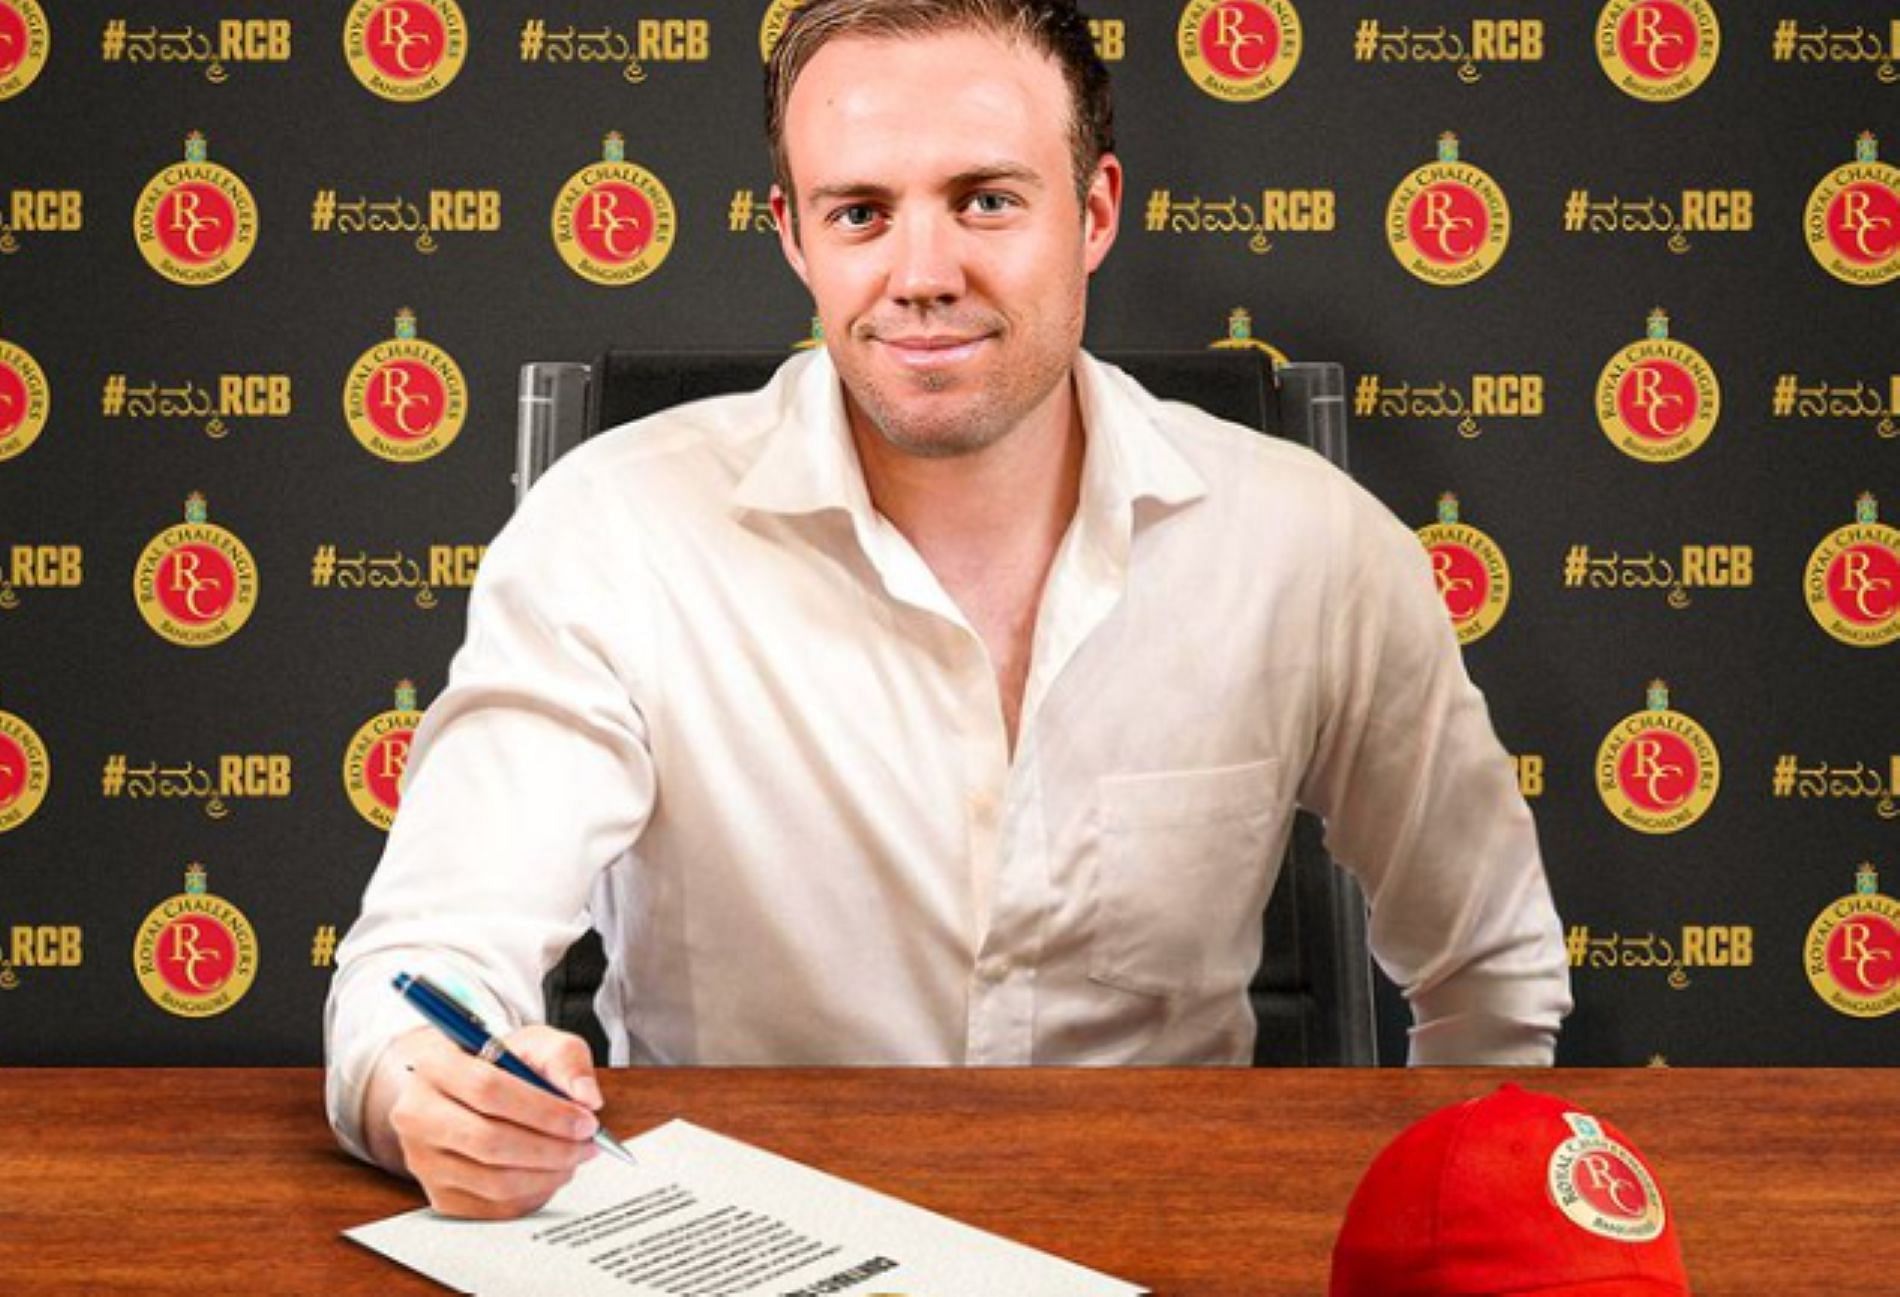 AB de Villiers and RCB remains among the most heartwarming stories in the IPL